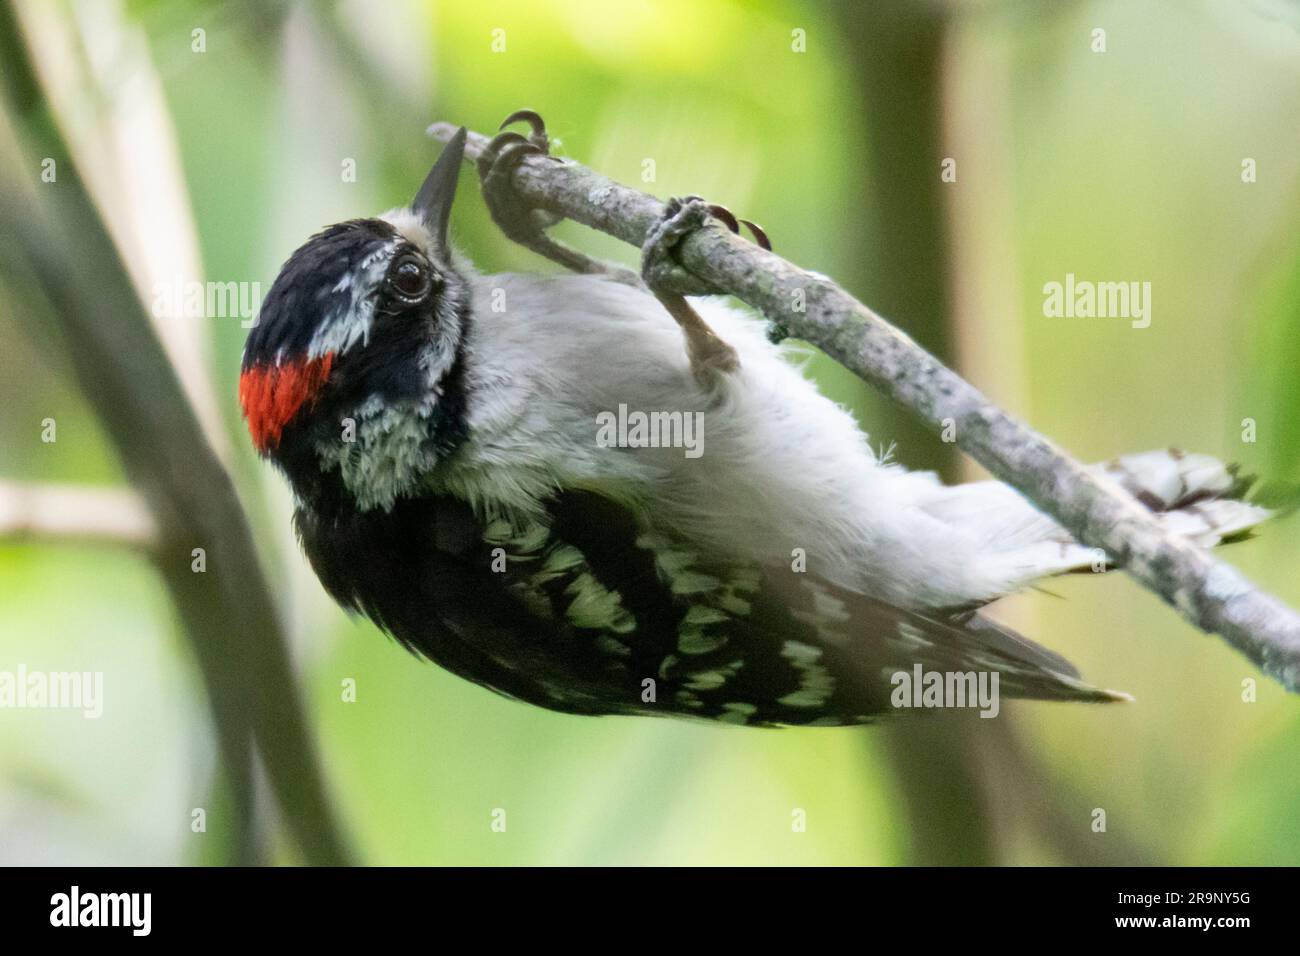 Downy woodpecker hanging upside down from a branch Stock Photo